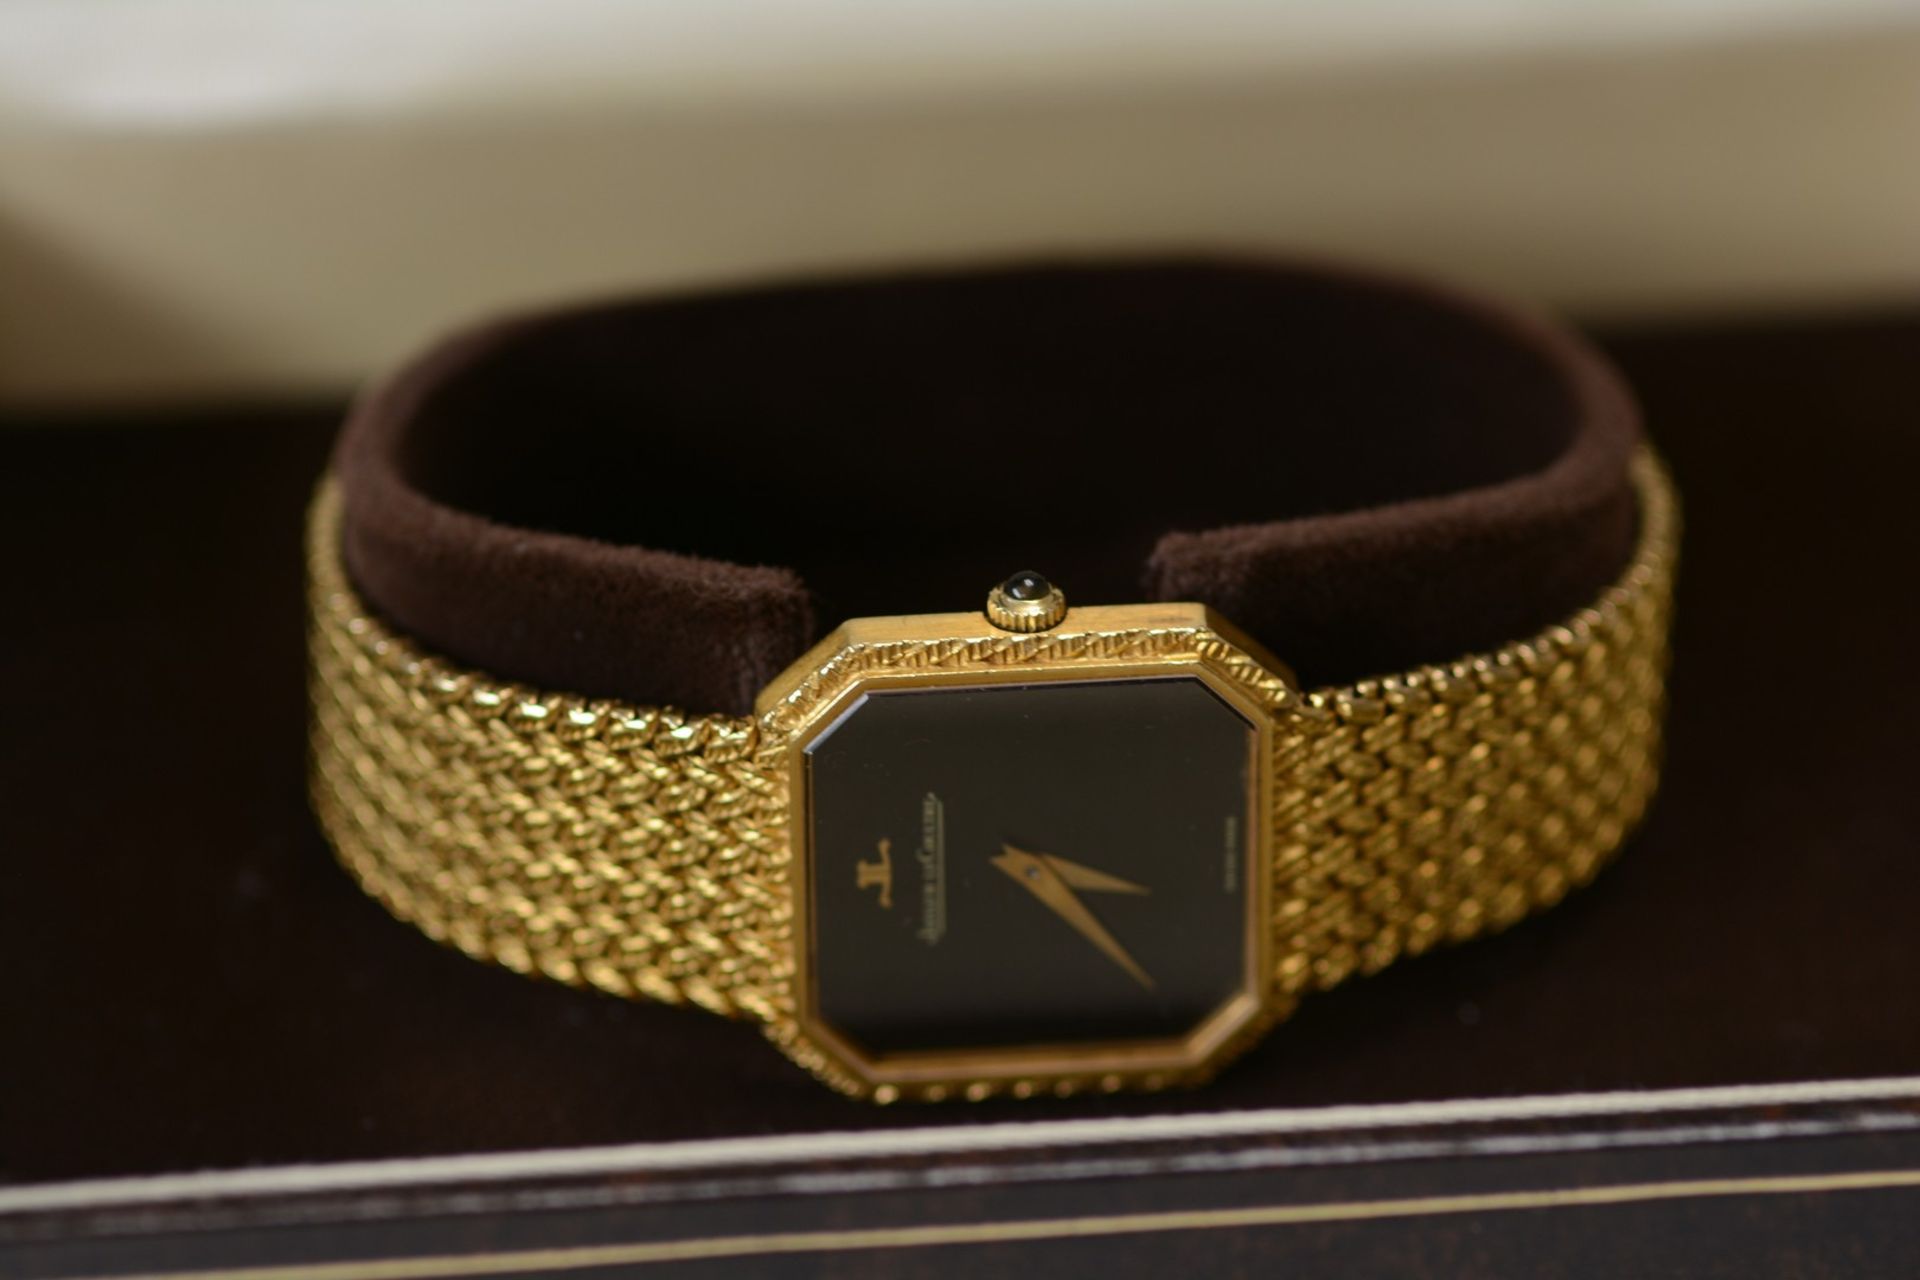 Jaeger-LeCoultre / Vintage - Unisex Yellow gold Wrist Watch - Image 2 of 14